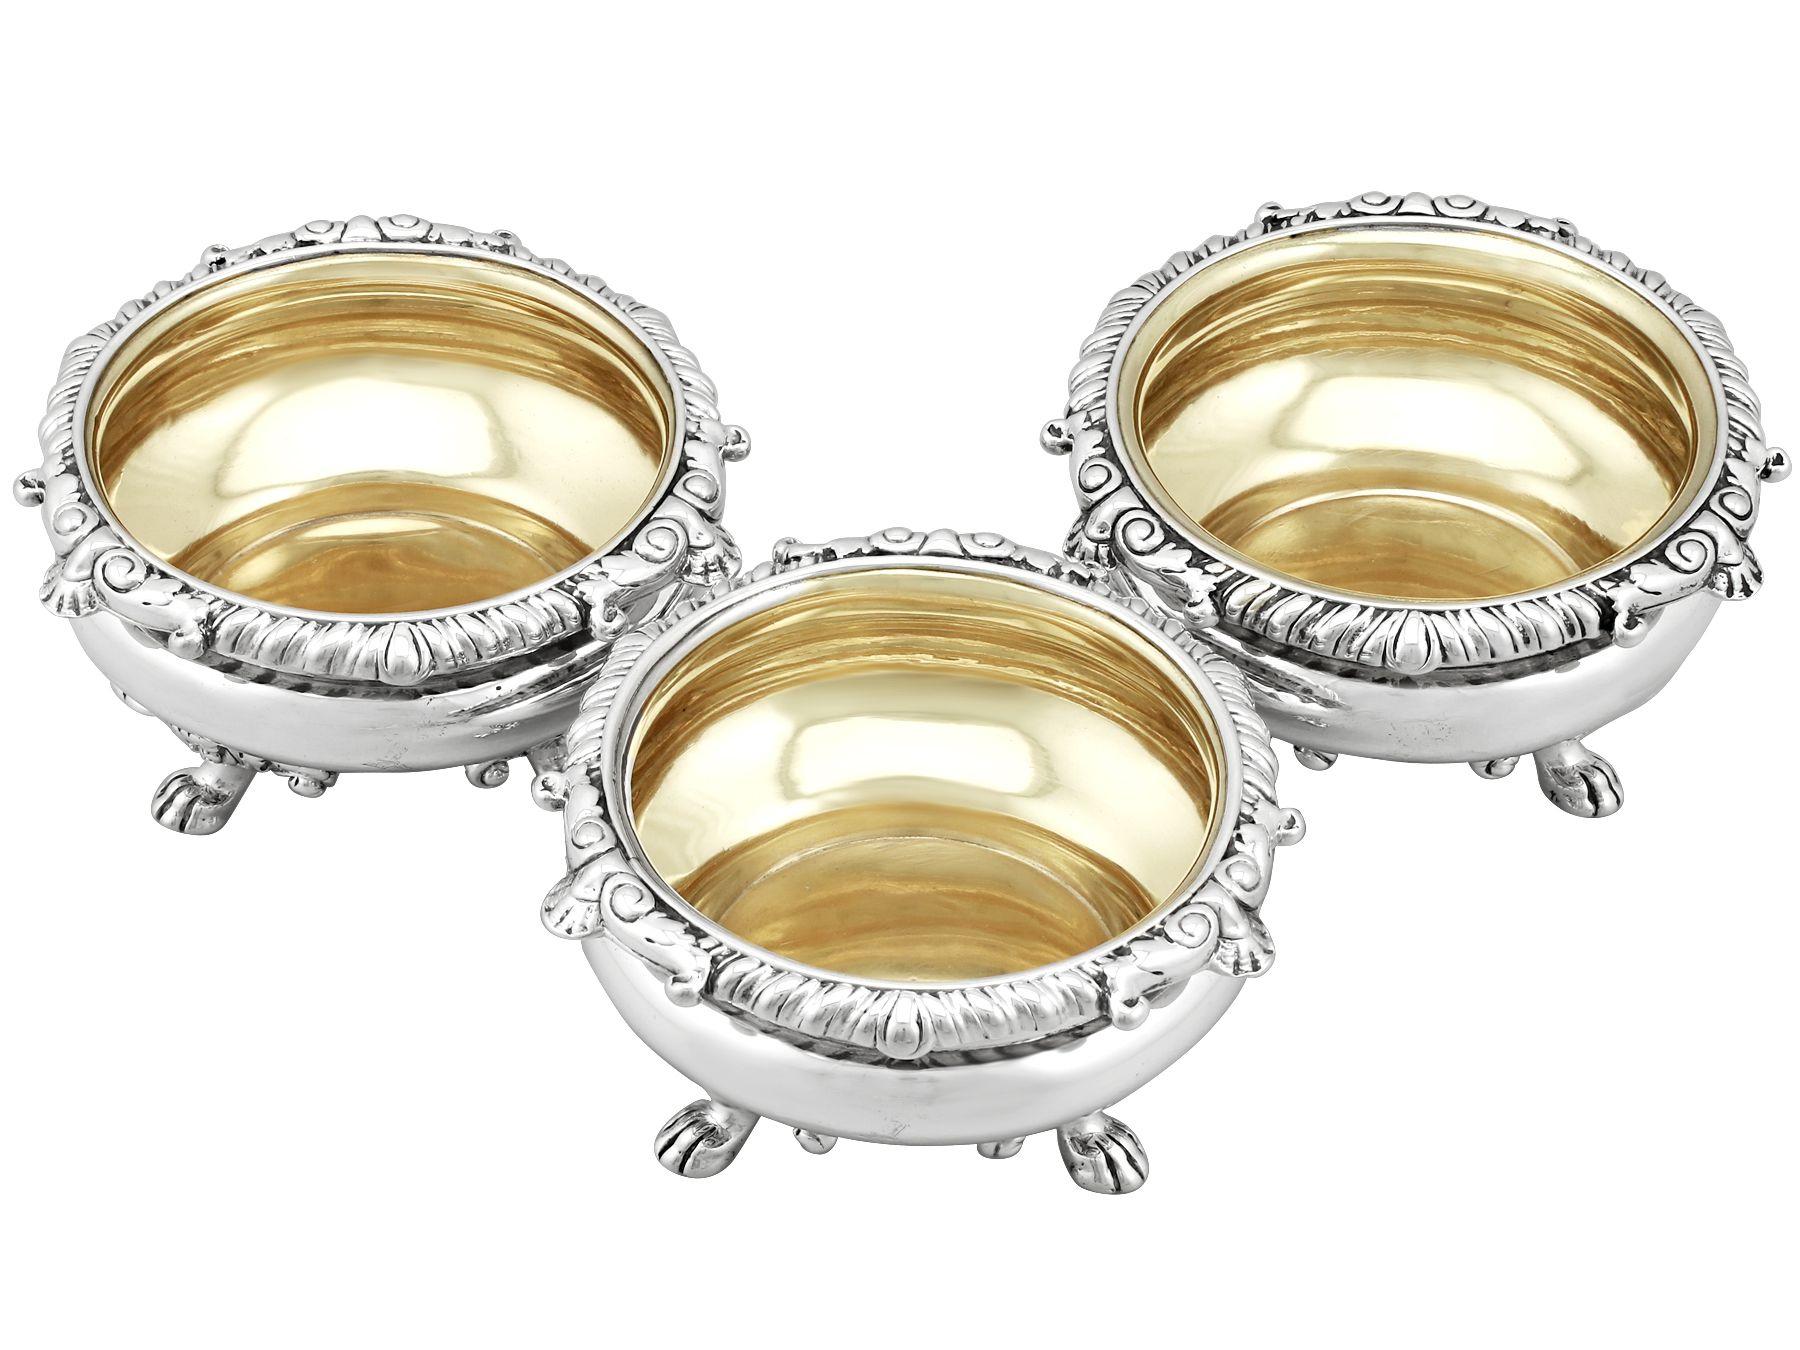 An exceptional, fine and impressive set of three antique Georgian English sterling silver salts made by Paul Storr; an addition to our silver cruet and condiment collection.

These exceptional antique George III sterling silver salts have a